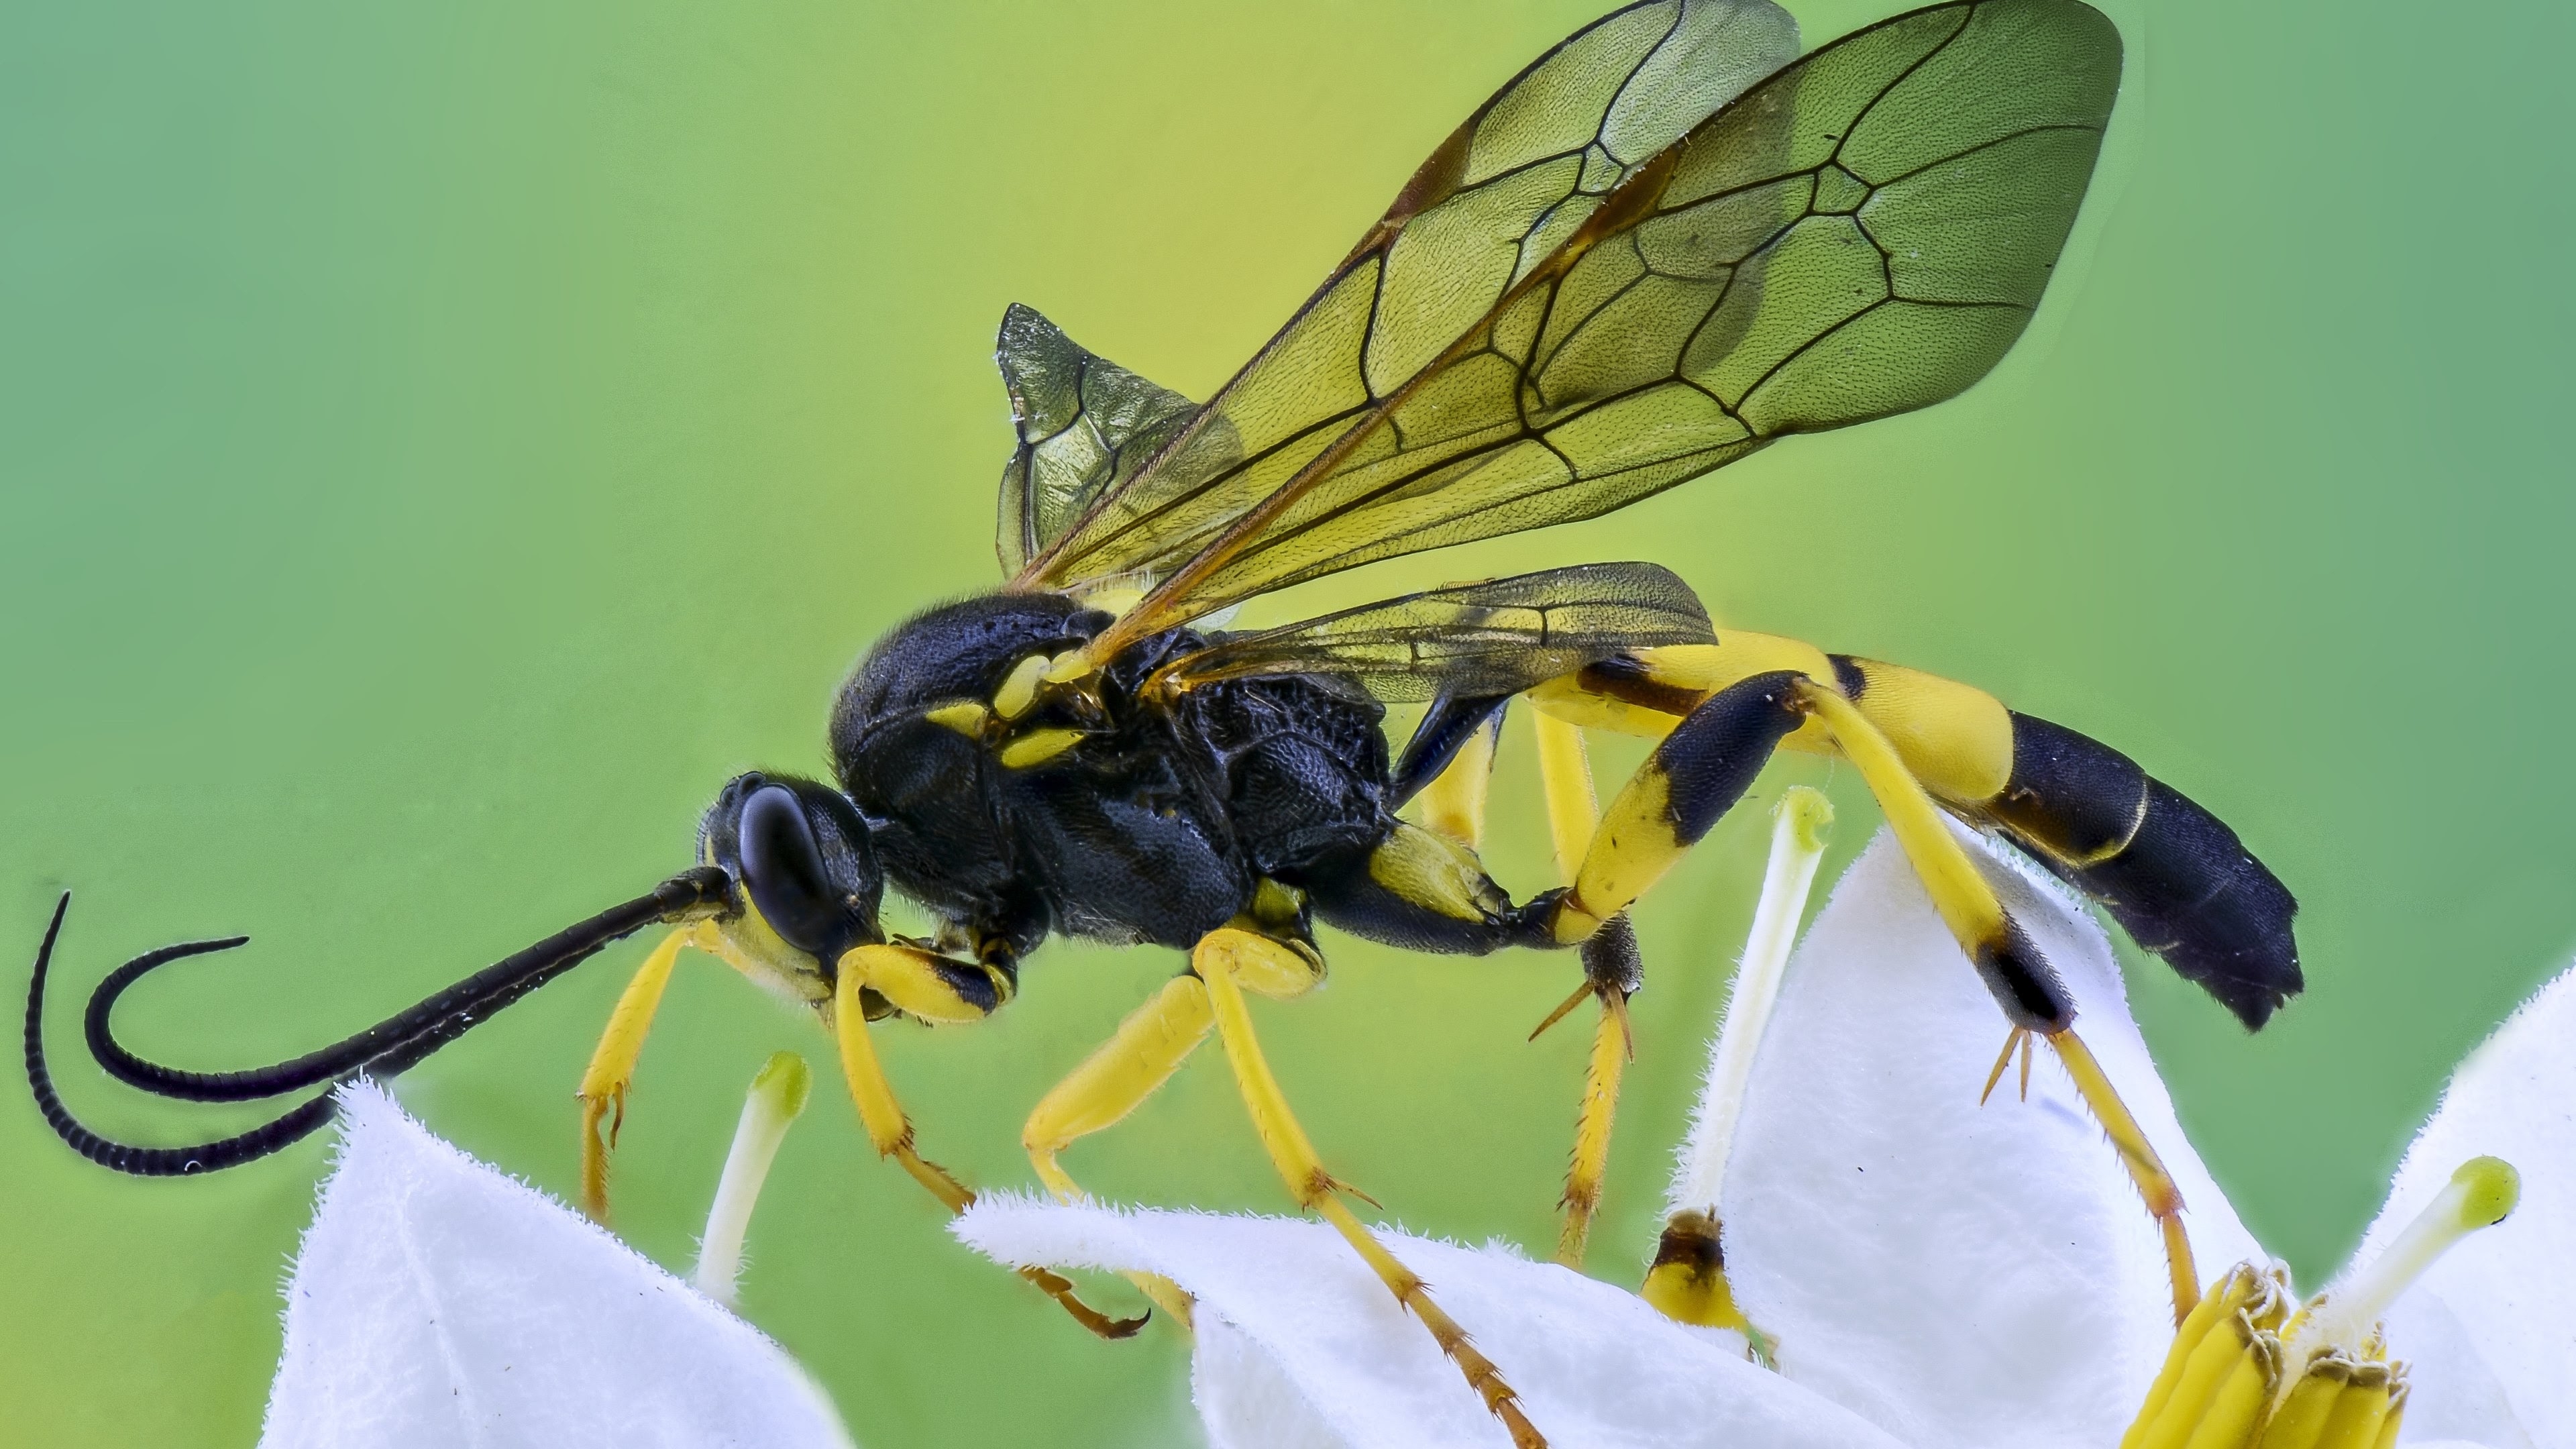 Wallpapers wallpaper insect close insects on the desktop